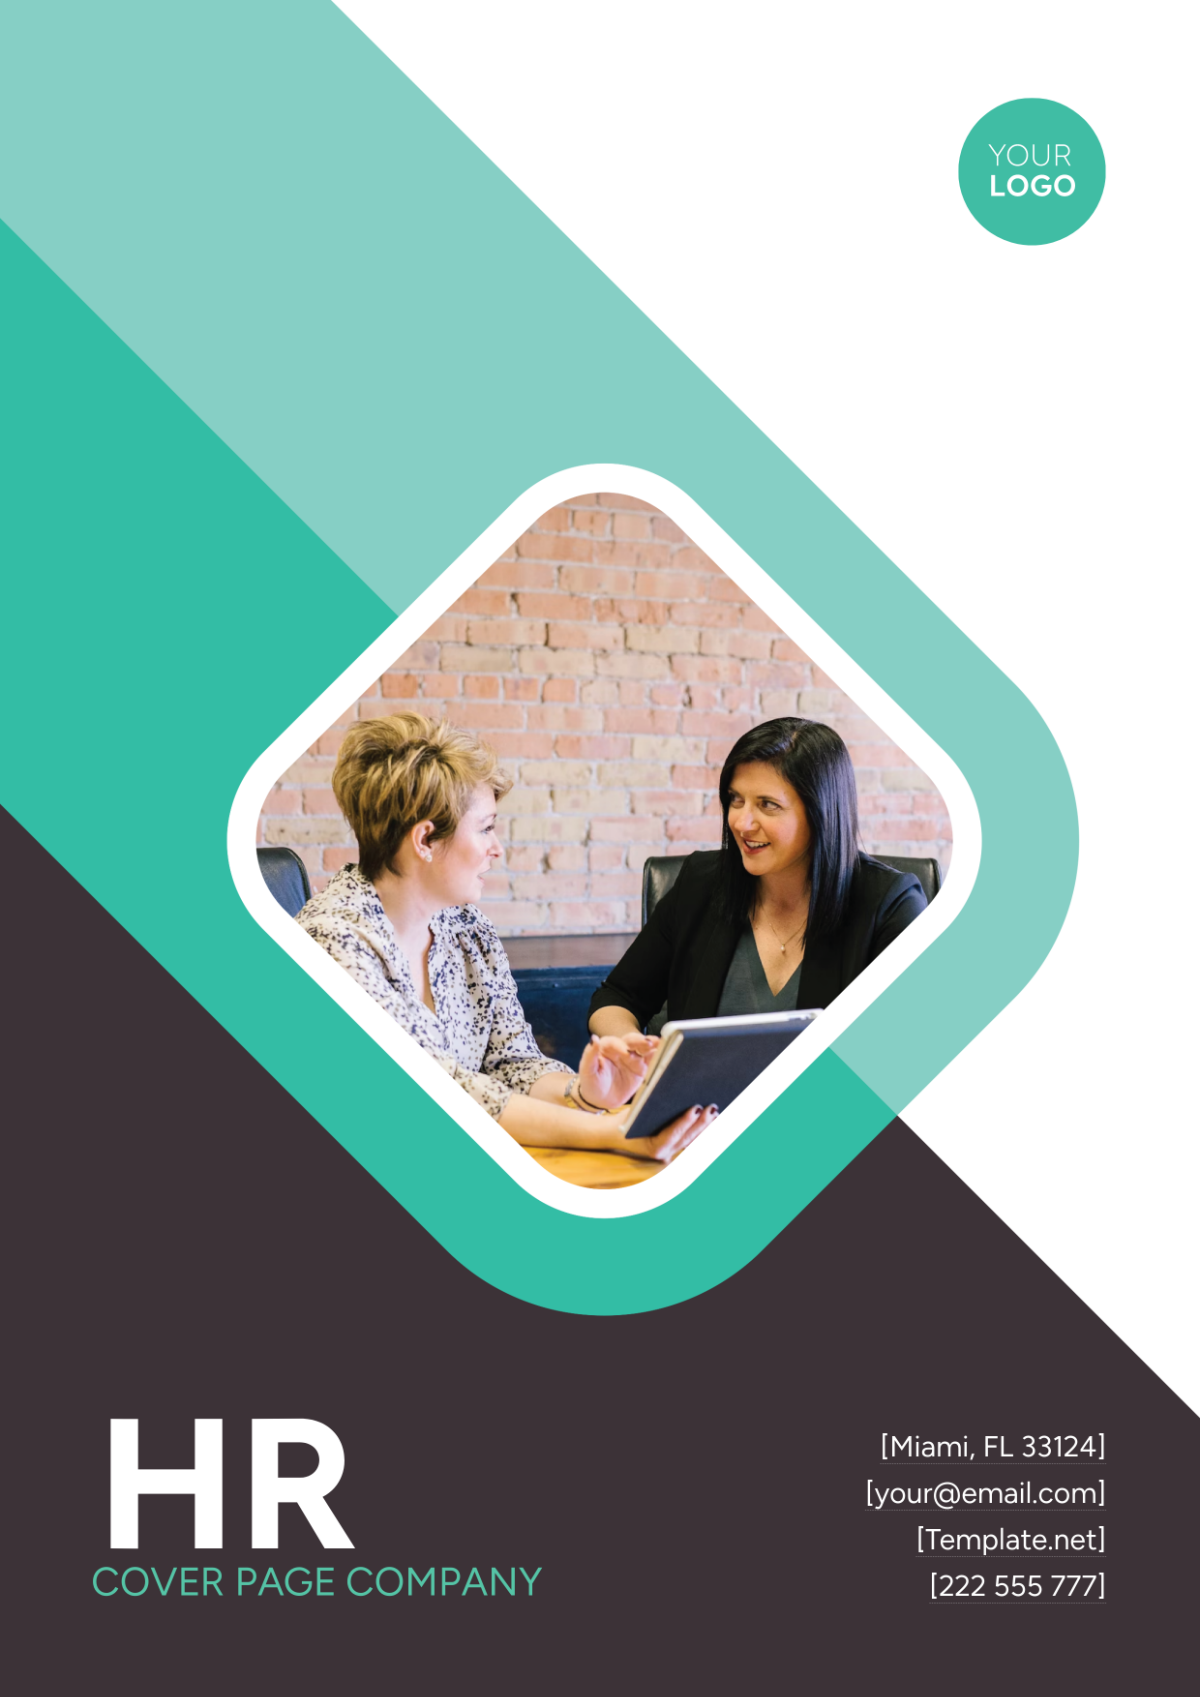 HR Cover Page Company Template